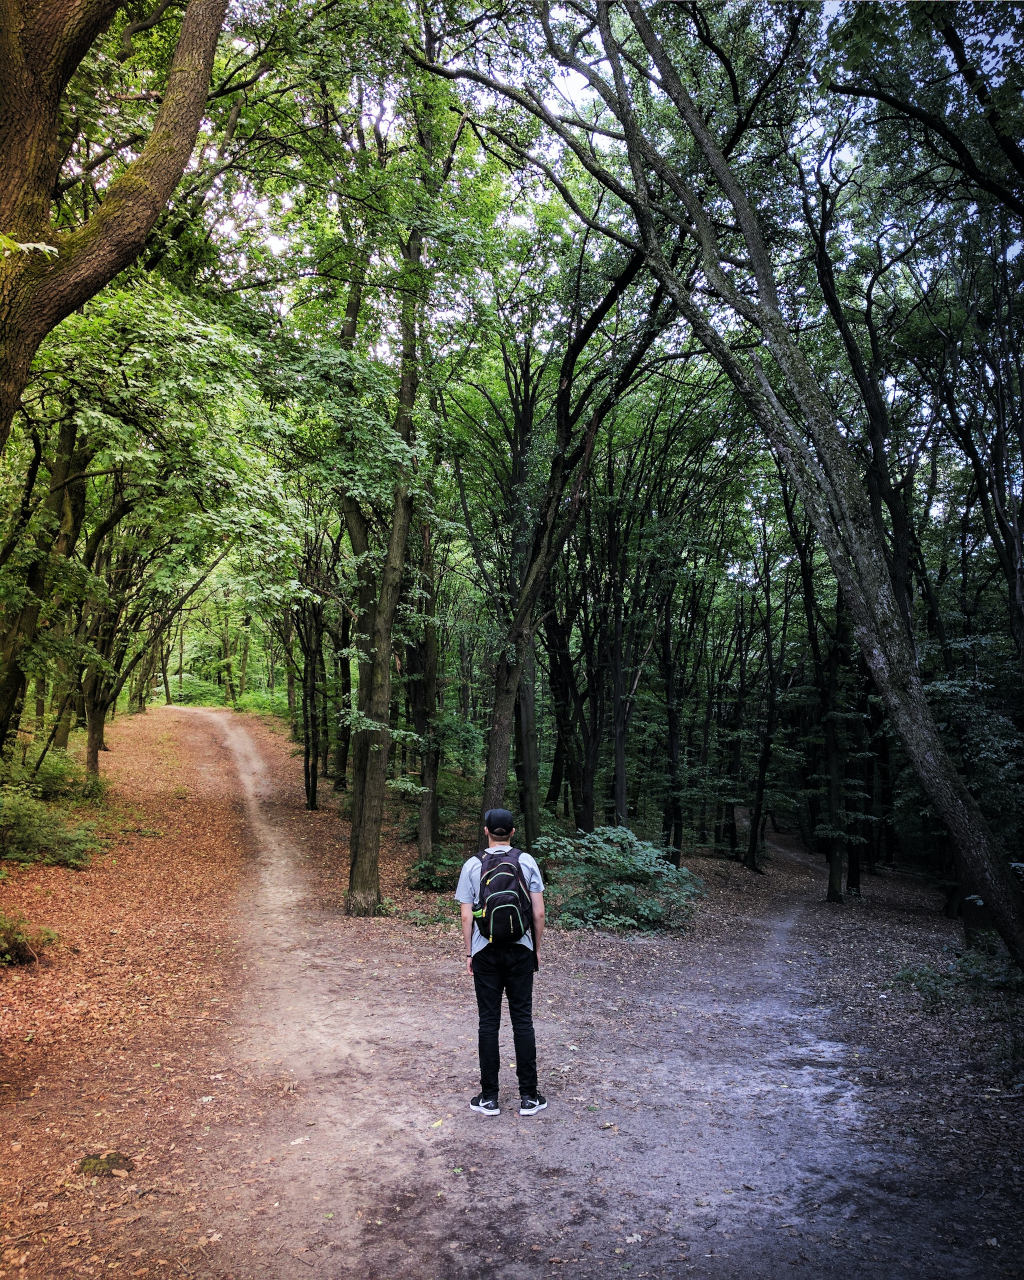 An image depicting a person standing at a crossroads, symbolizing the importance of choosing the right niche path.